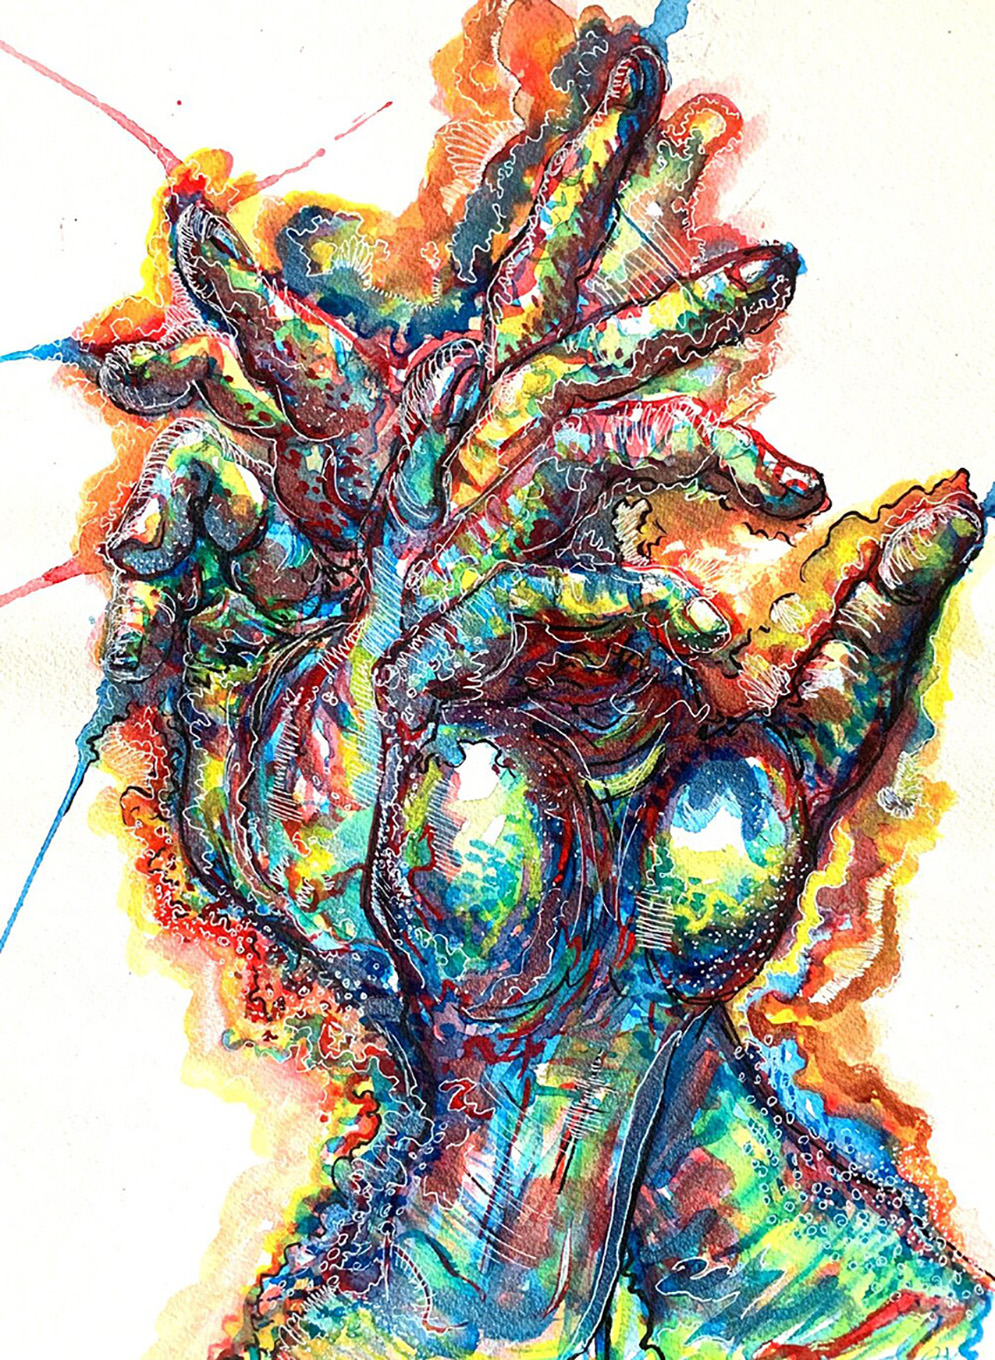 A watercolor painting using mainly red, yellow, and blue paint. There are two hands, the right hand crosses over the left hand with the fingers curving and bending slightly to grab something above it. The right hand looks like it is trying to caress something off the frame of the painting. The hands are mostly blue and are surrounded by yellow, orange, and red paint. The hands are outlined in thin white lines and dots creating the shape of the hands.